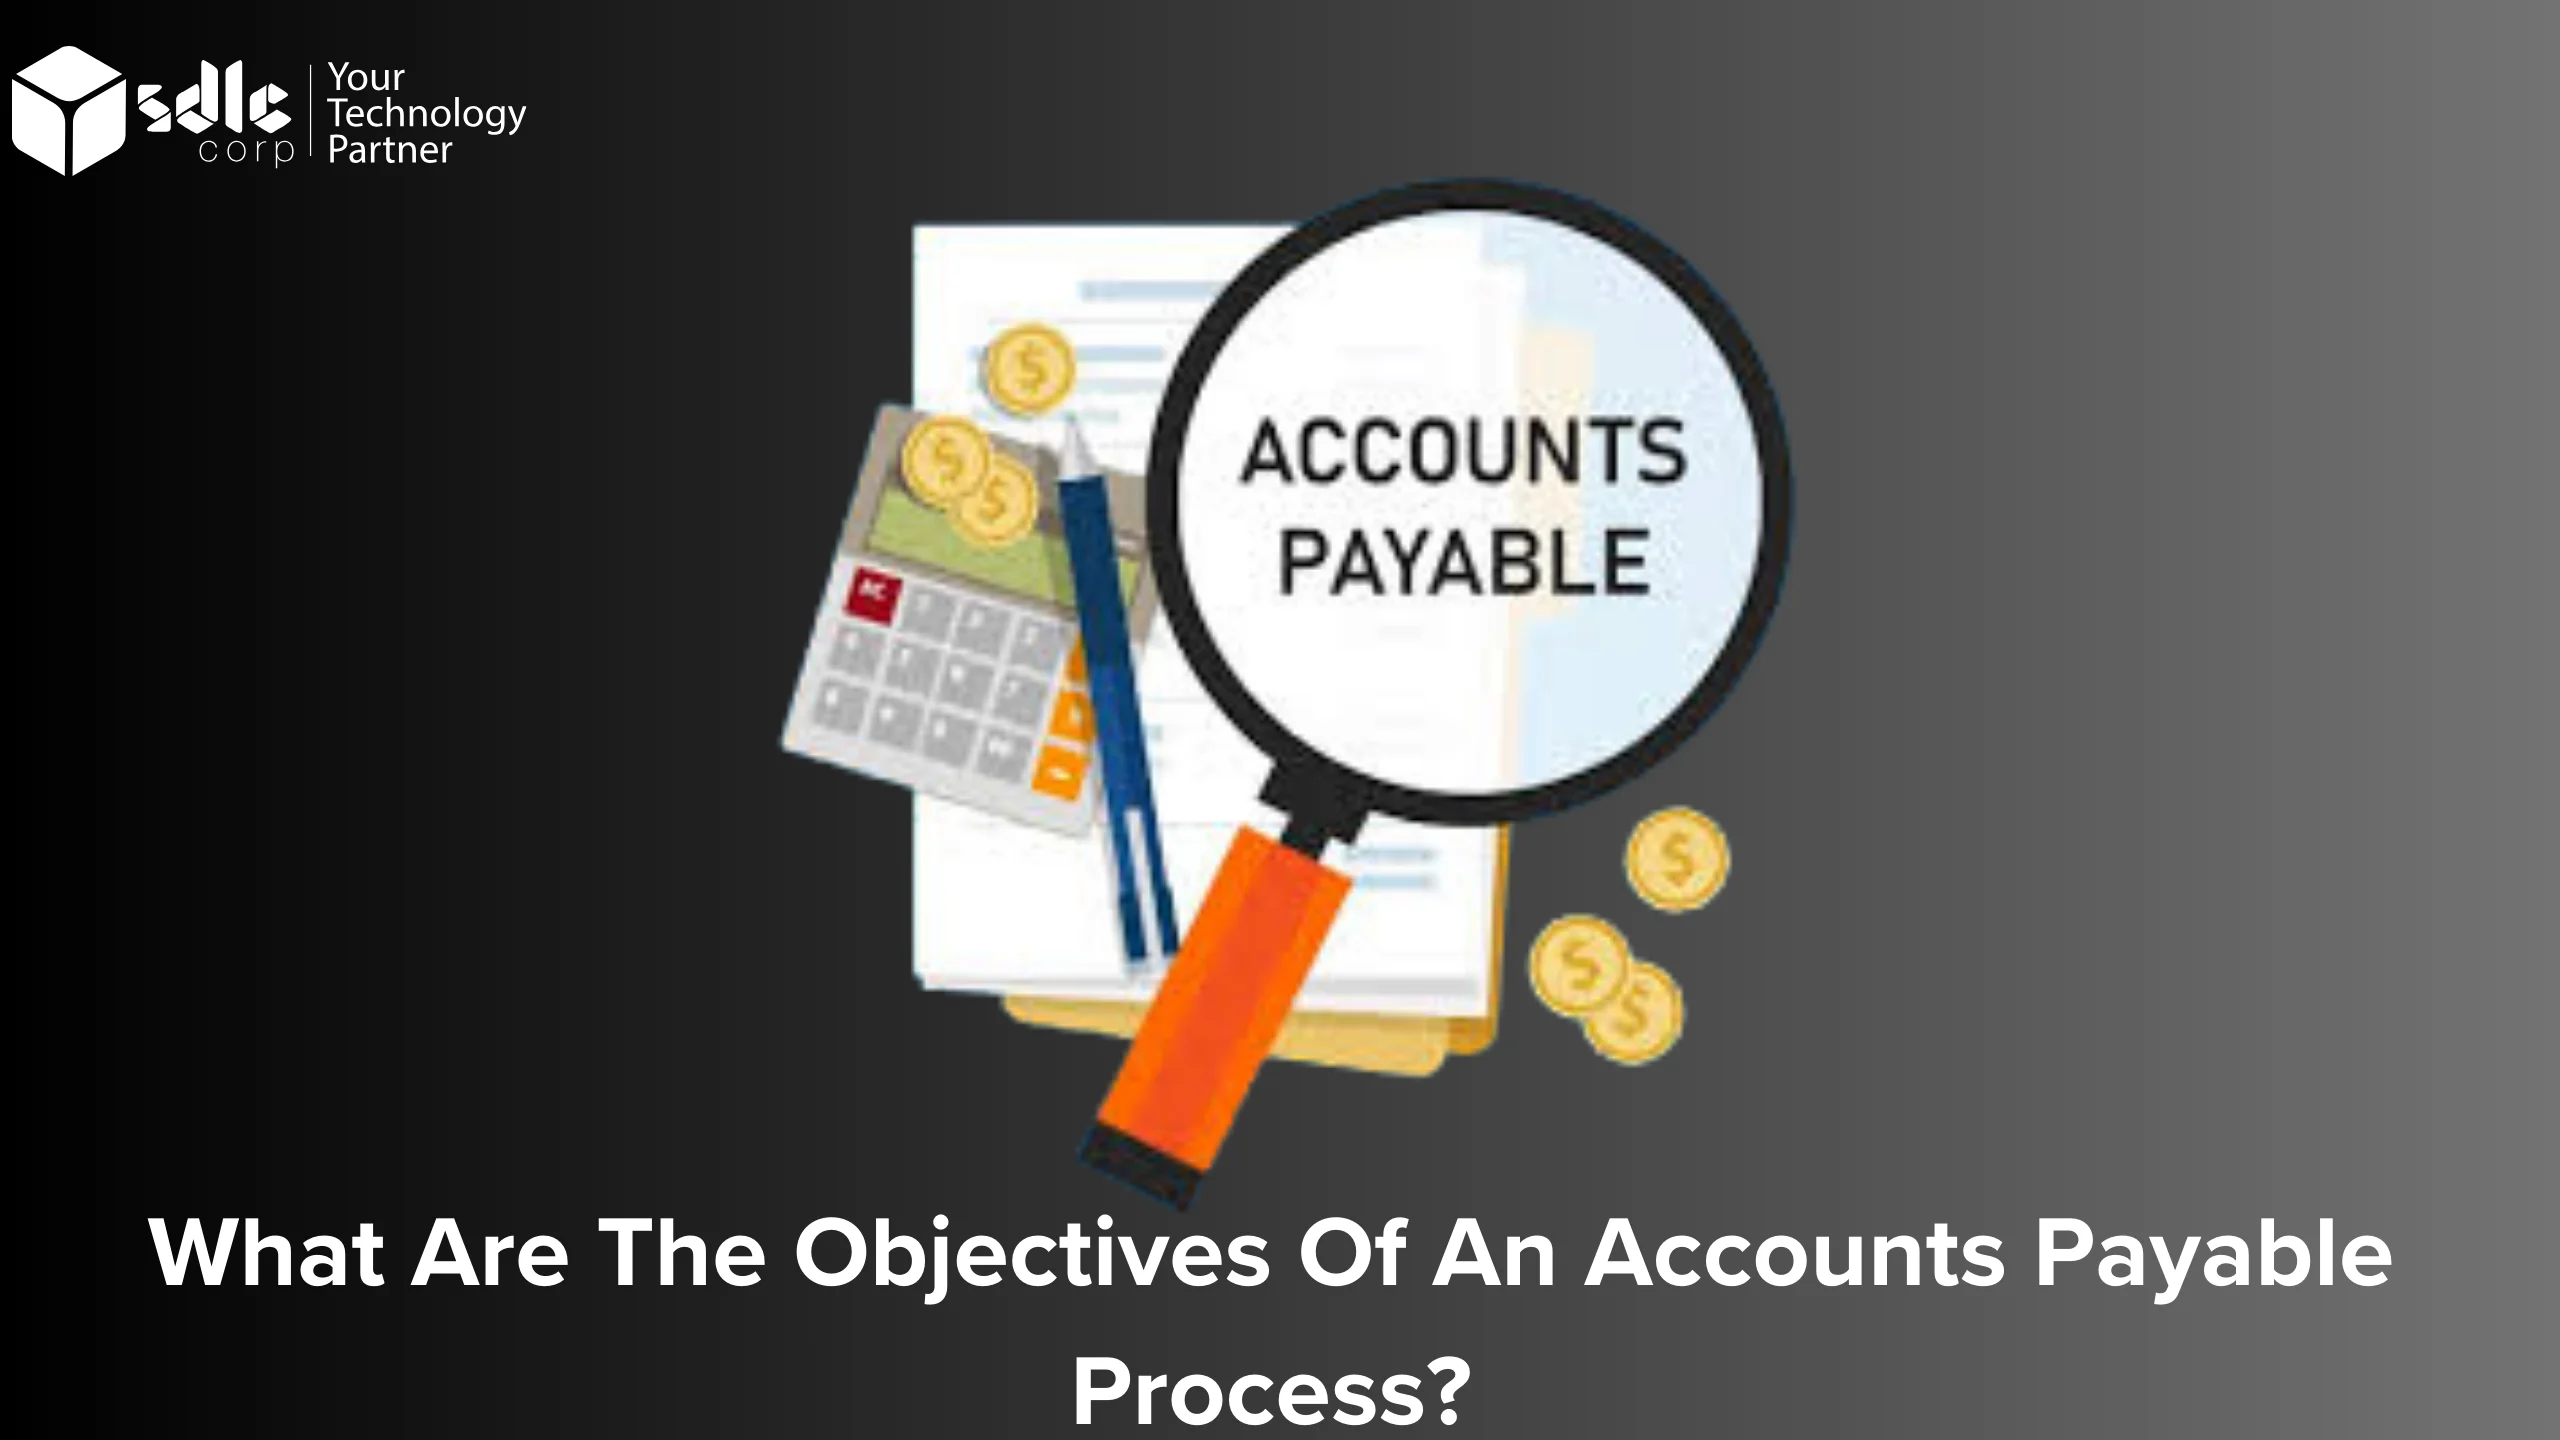 What Are the Objectives of an Accounts Payable Process